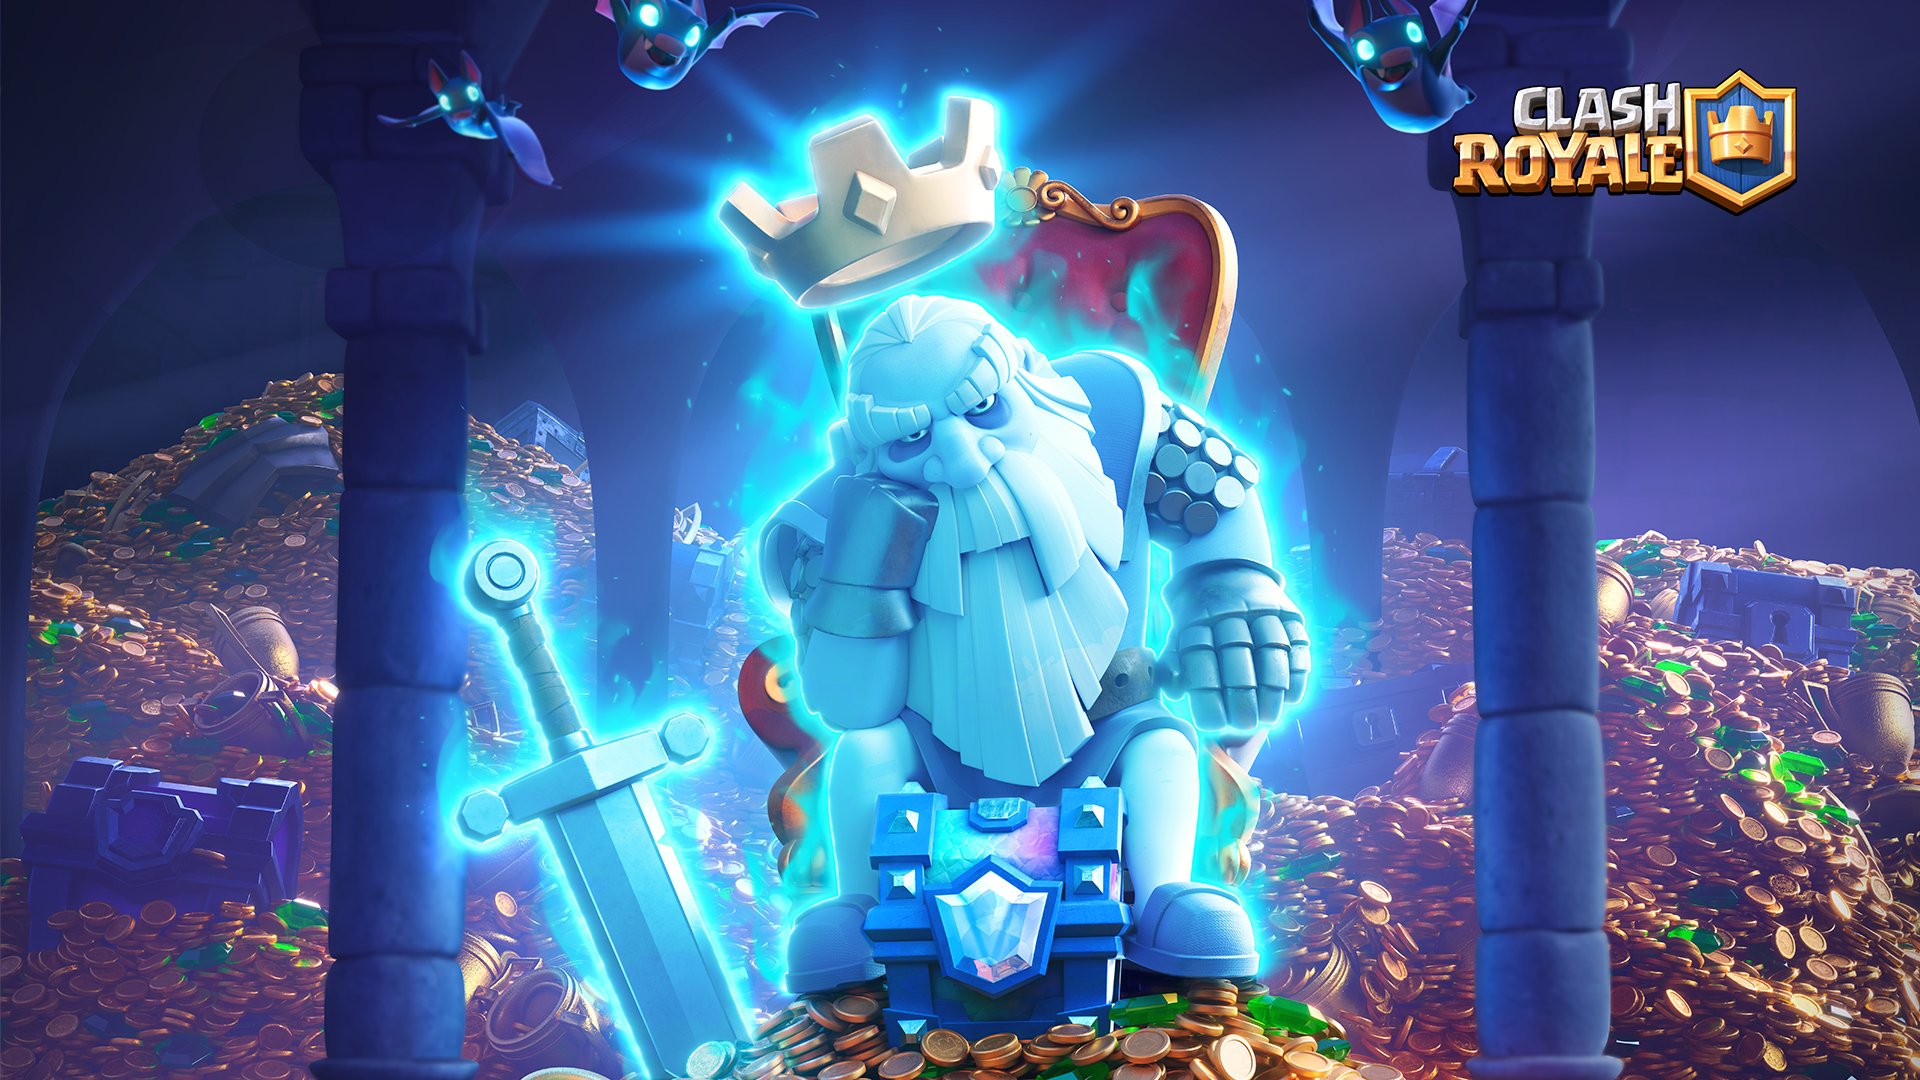 Clash Royale a new wallpaper? We've got a bunch here that you can download, featuring this Season's Royally grumpy Ghost. Made by the lovely if you were